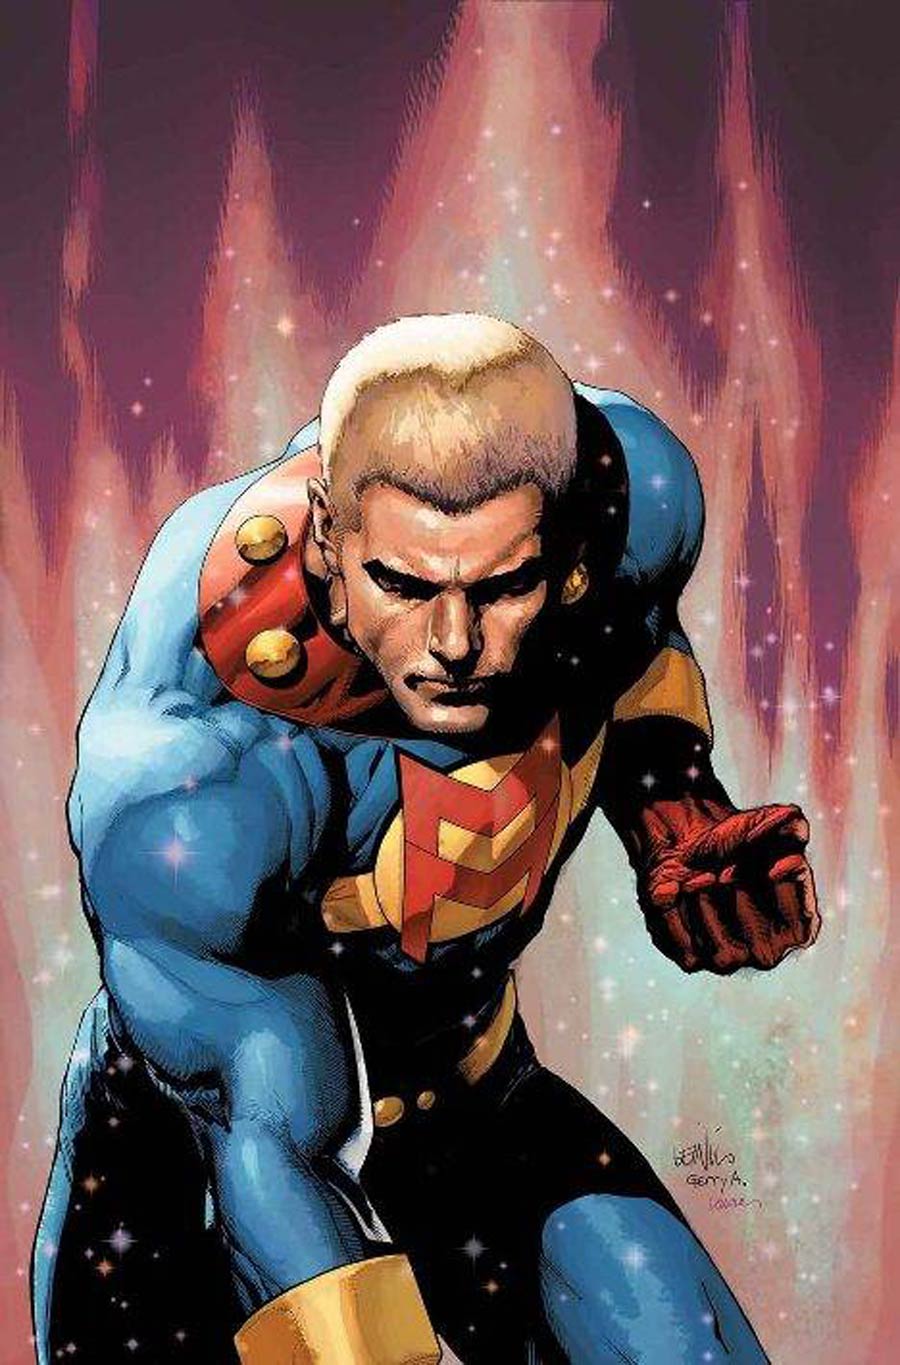 Miracleman (Marvel) #1 By Leinil Francis Yu Poster